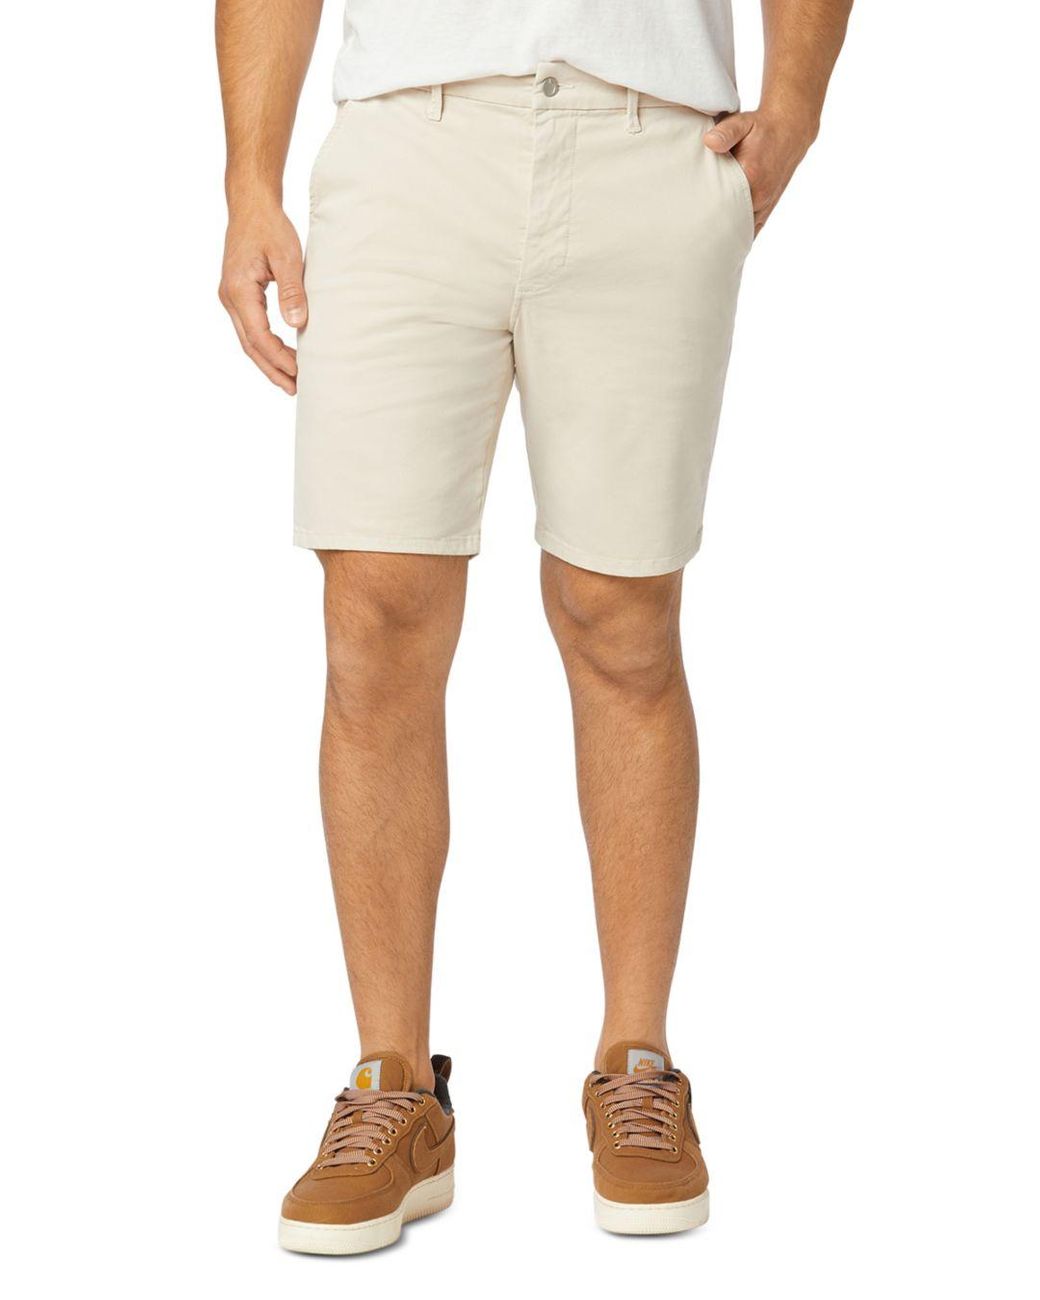 Joe's Jeans Cotton The Brixton Slim Fit Shorts in Natural for Men - Lyst